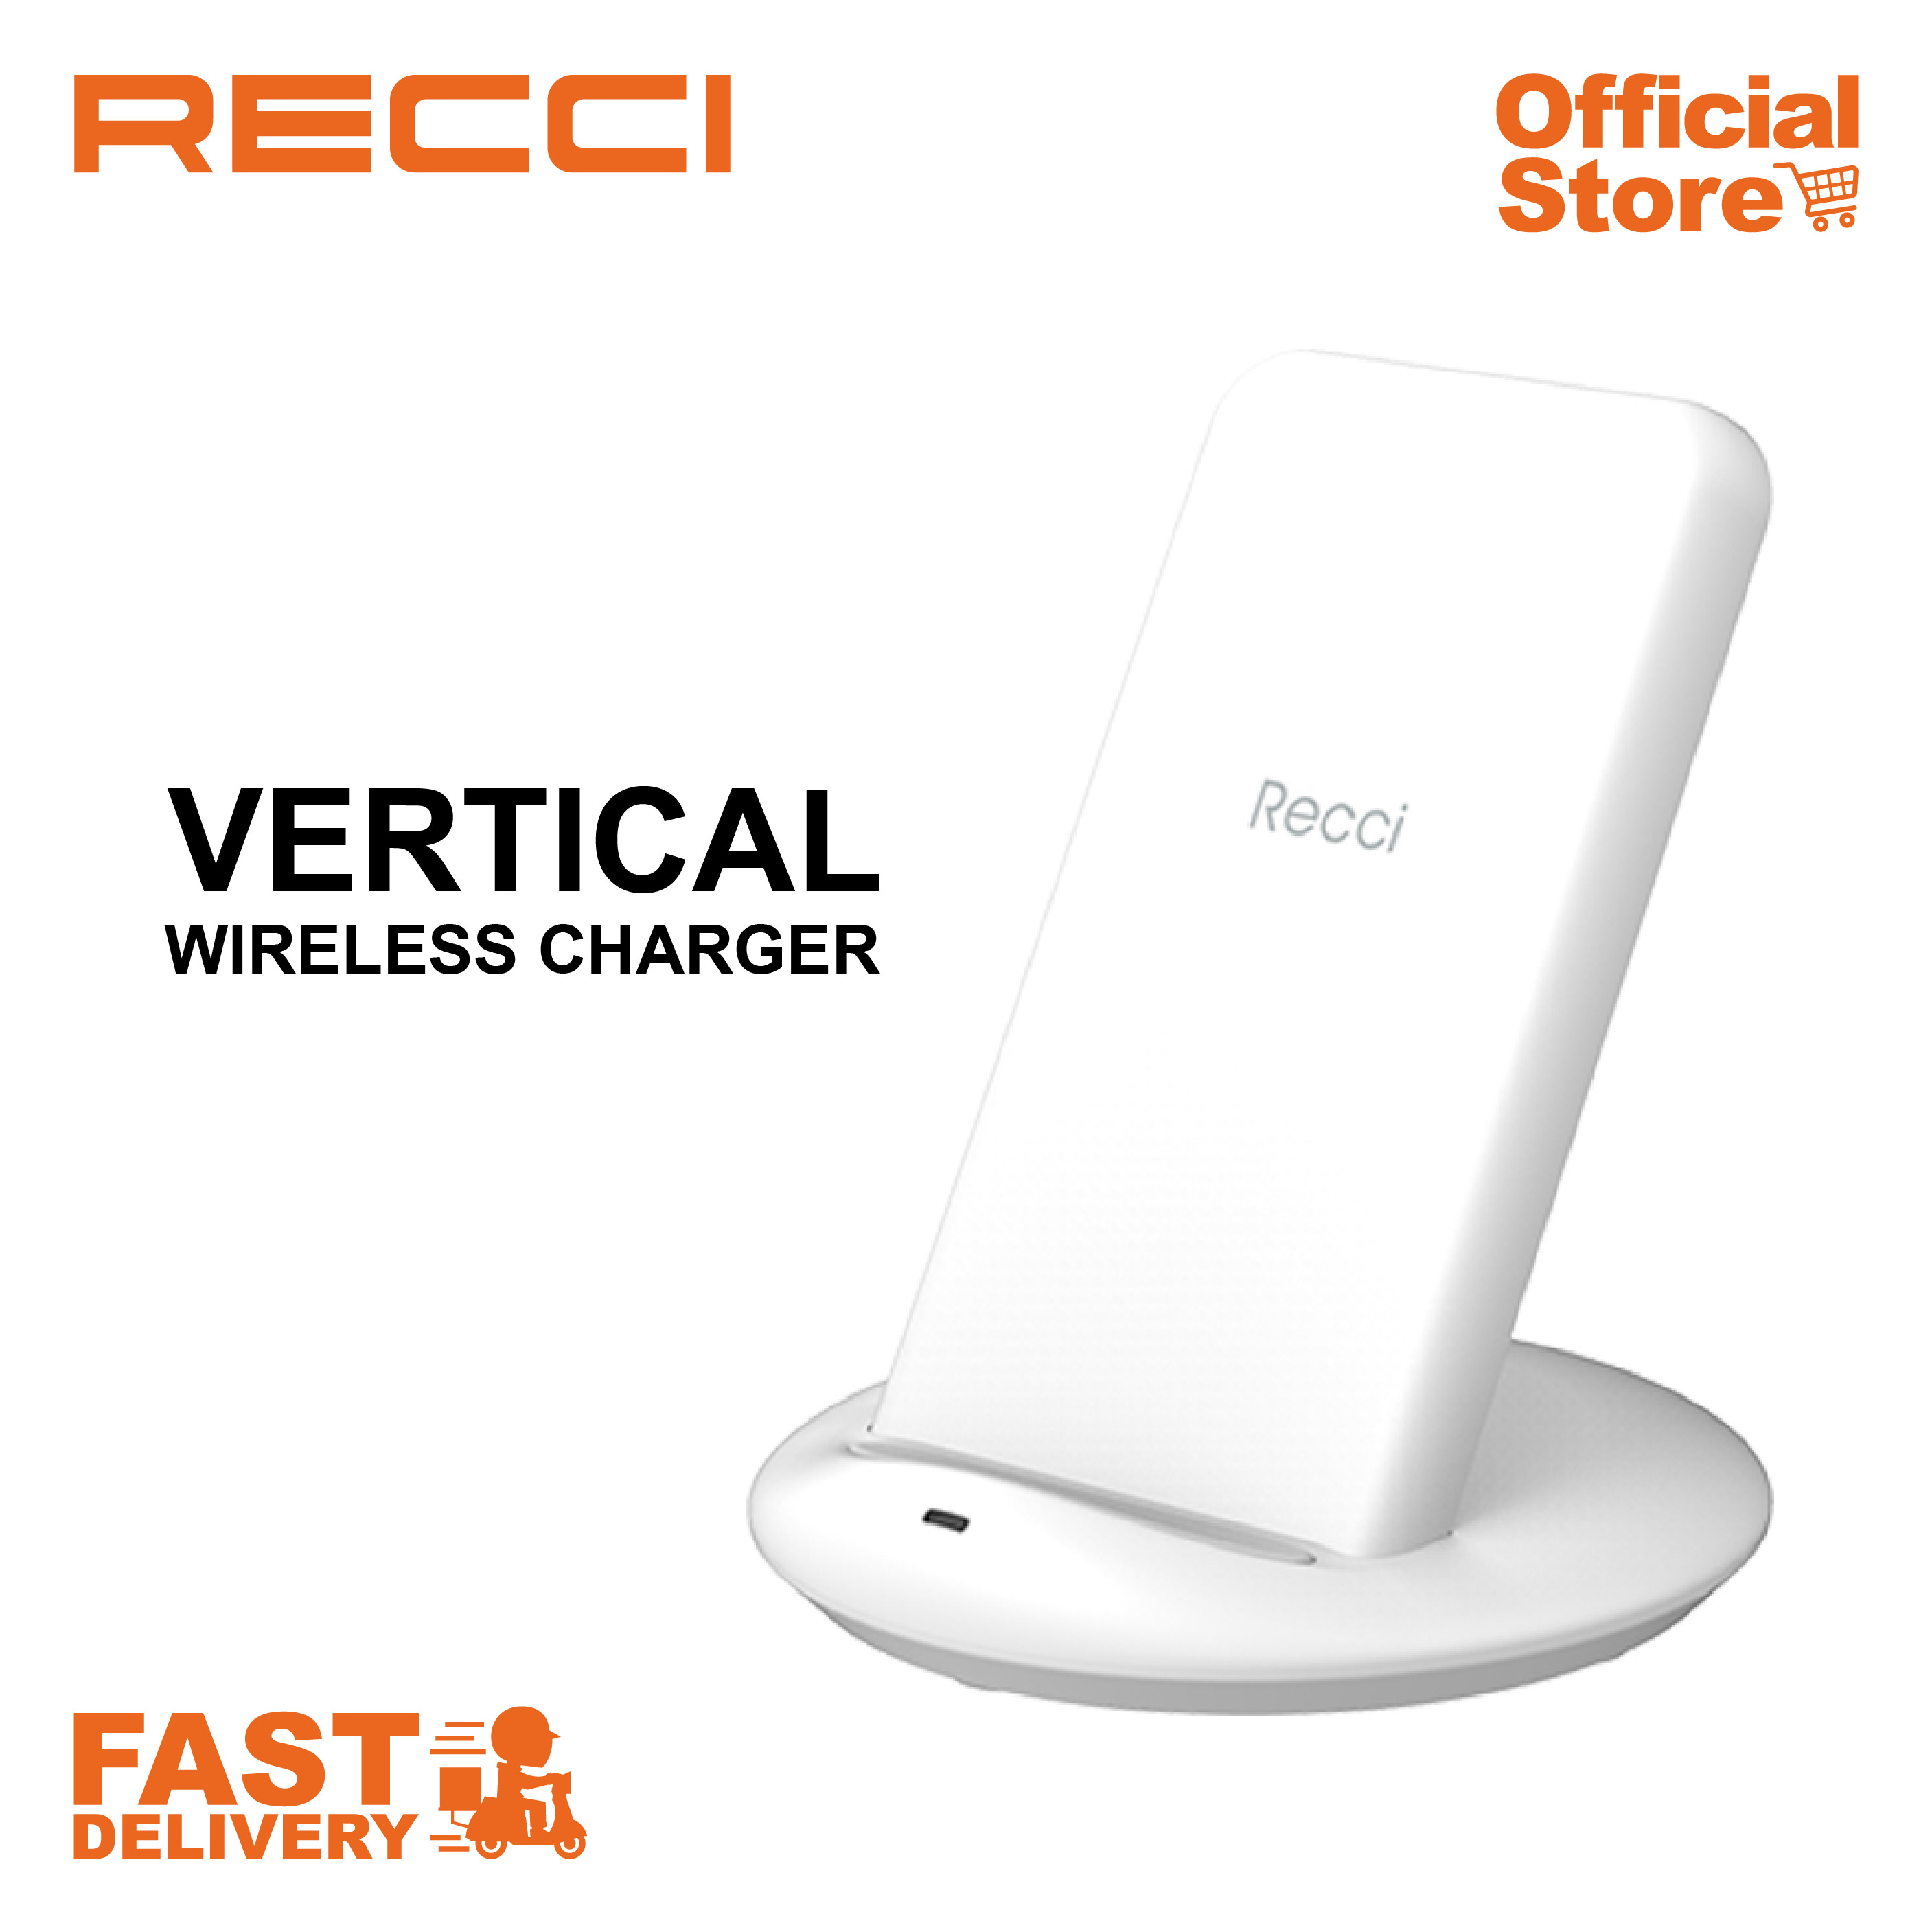 VERTICAL WIRELESS CHARGER(置き型充電器) RECCI - バッテリー/充電器